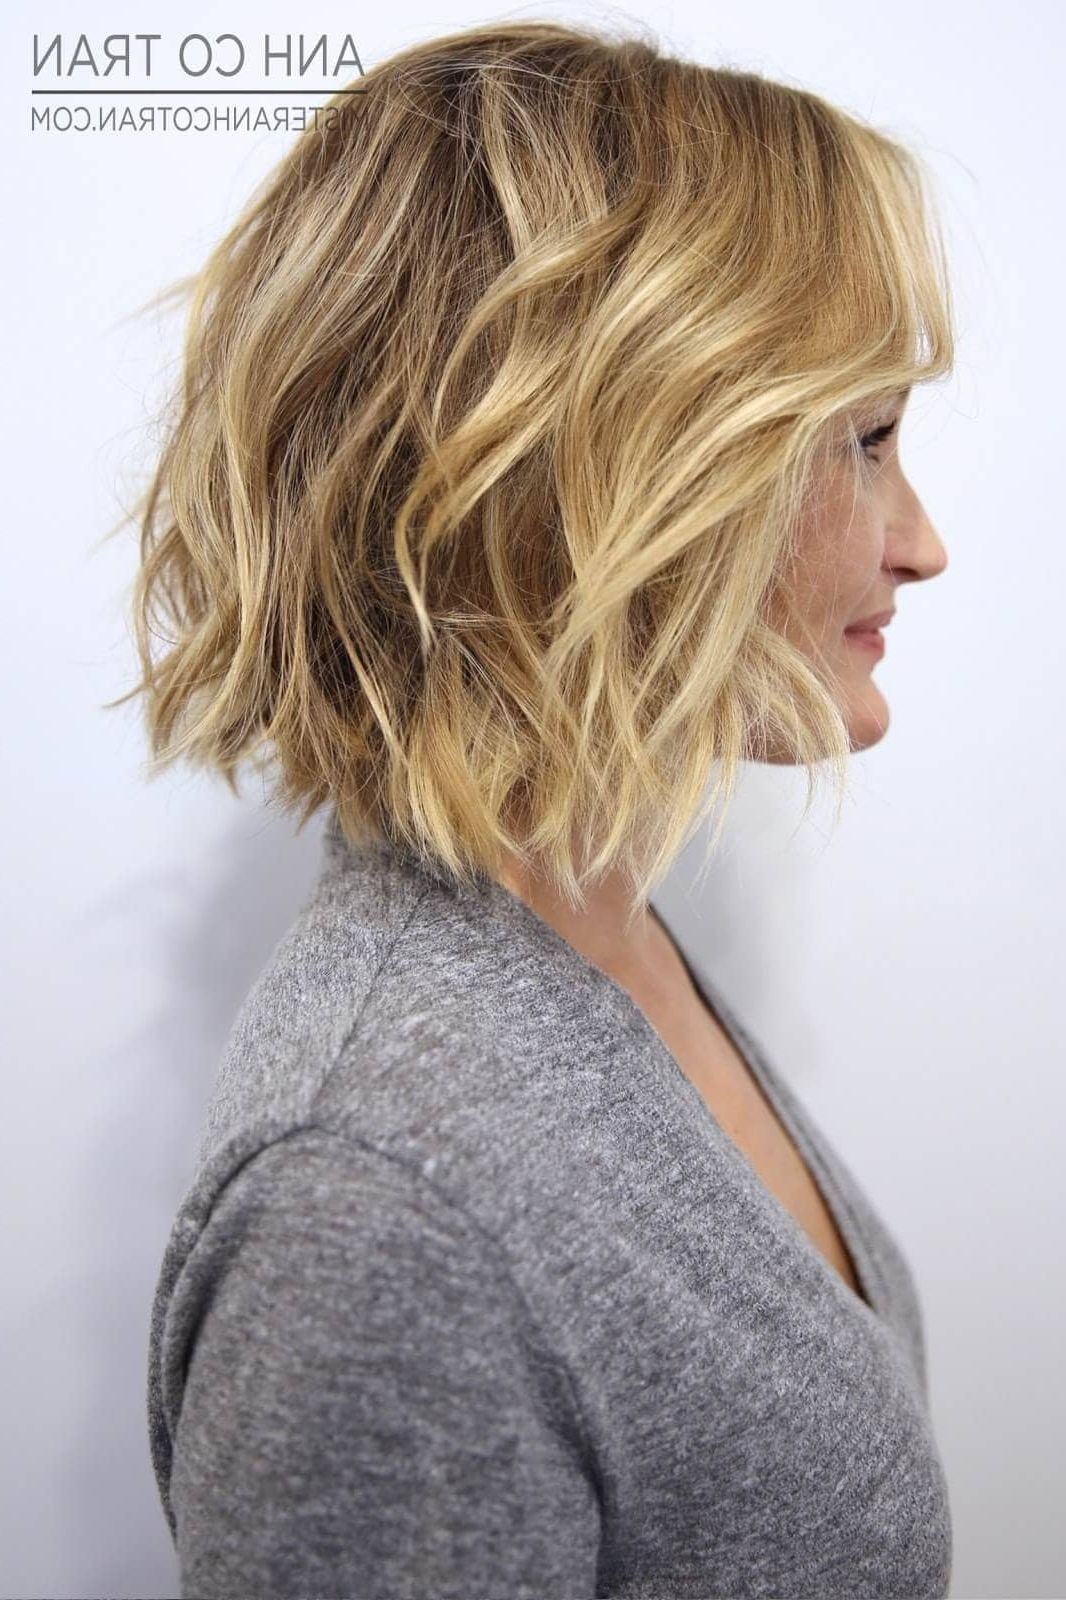 50 Ways To Wear Short Hair With Bangs For A Fresh New Look Within Recent Finely Chopped Buttery Blonde Pixie Haircuts (View 8 of 15)